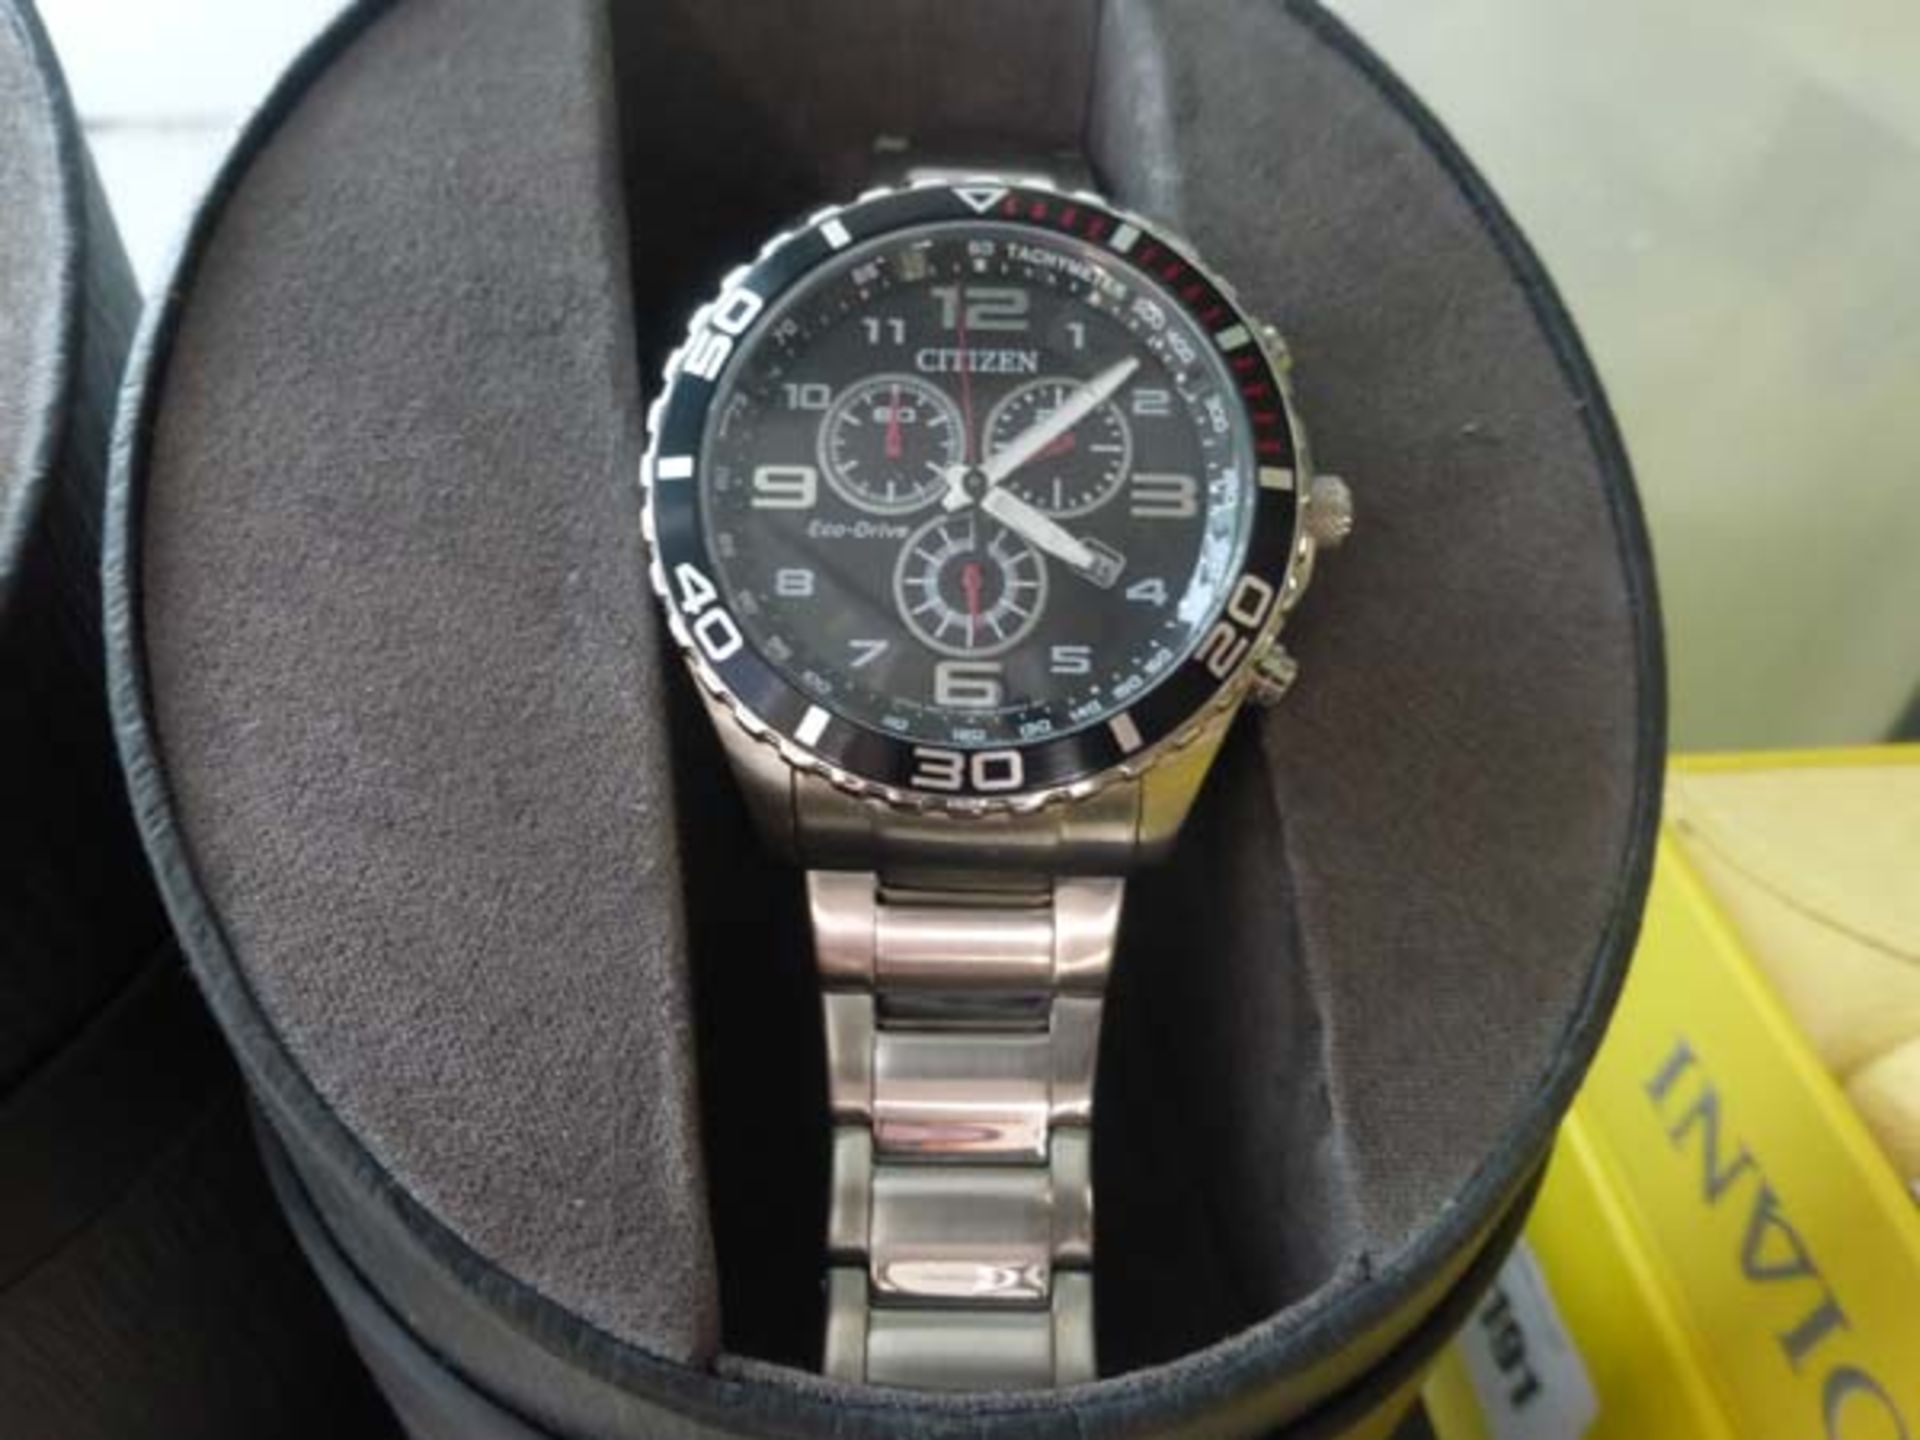 Citizen Eco Drive chronograph wristwatch with stainless steel strap and box